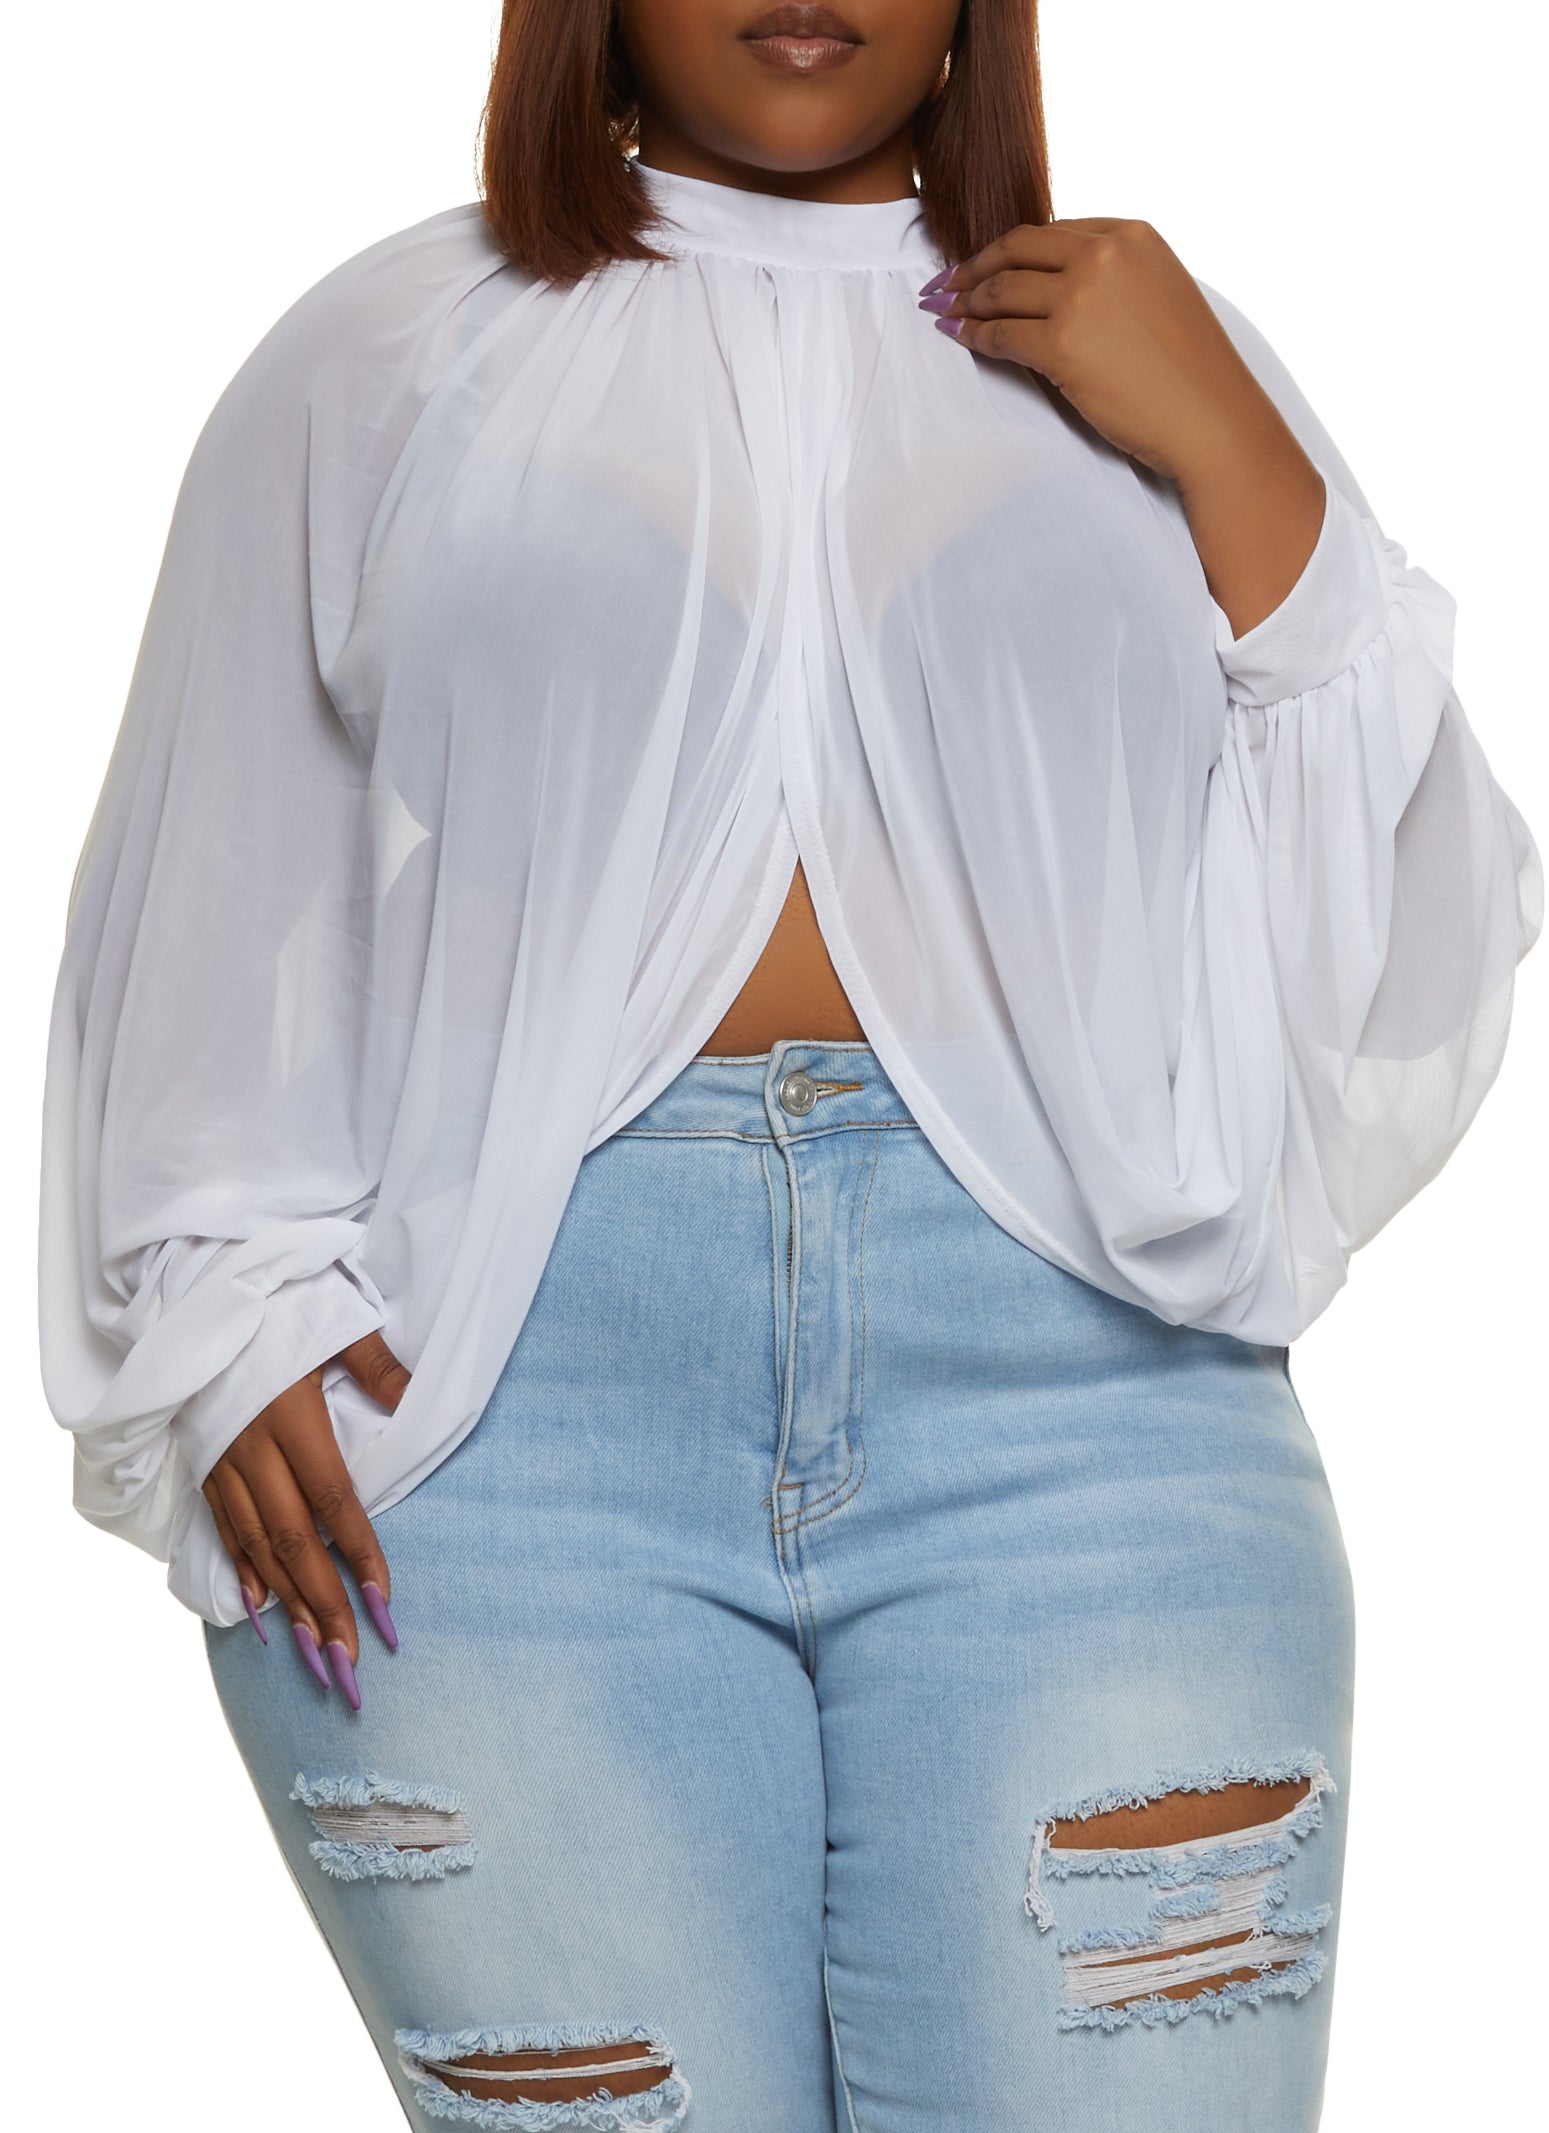 Plus Size Going Out Tops | Low Prices | Rainbow